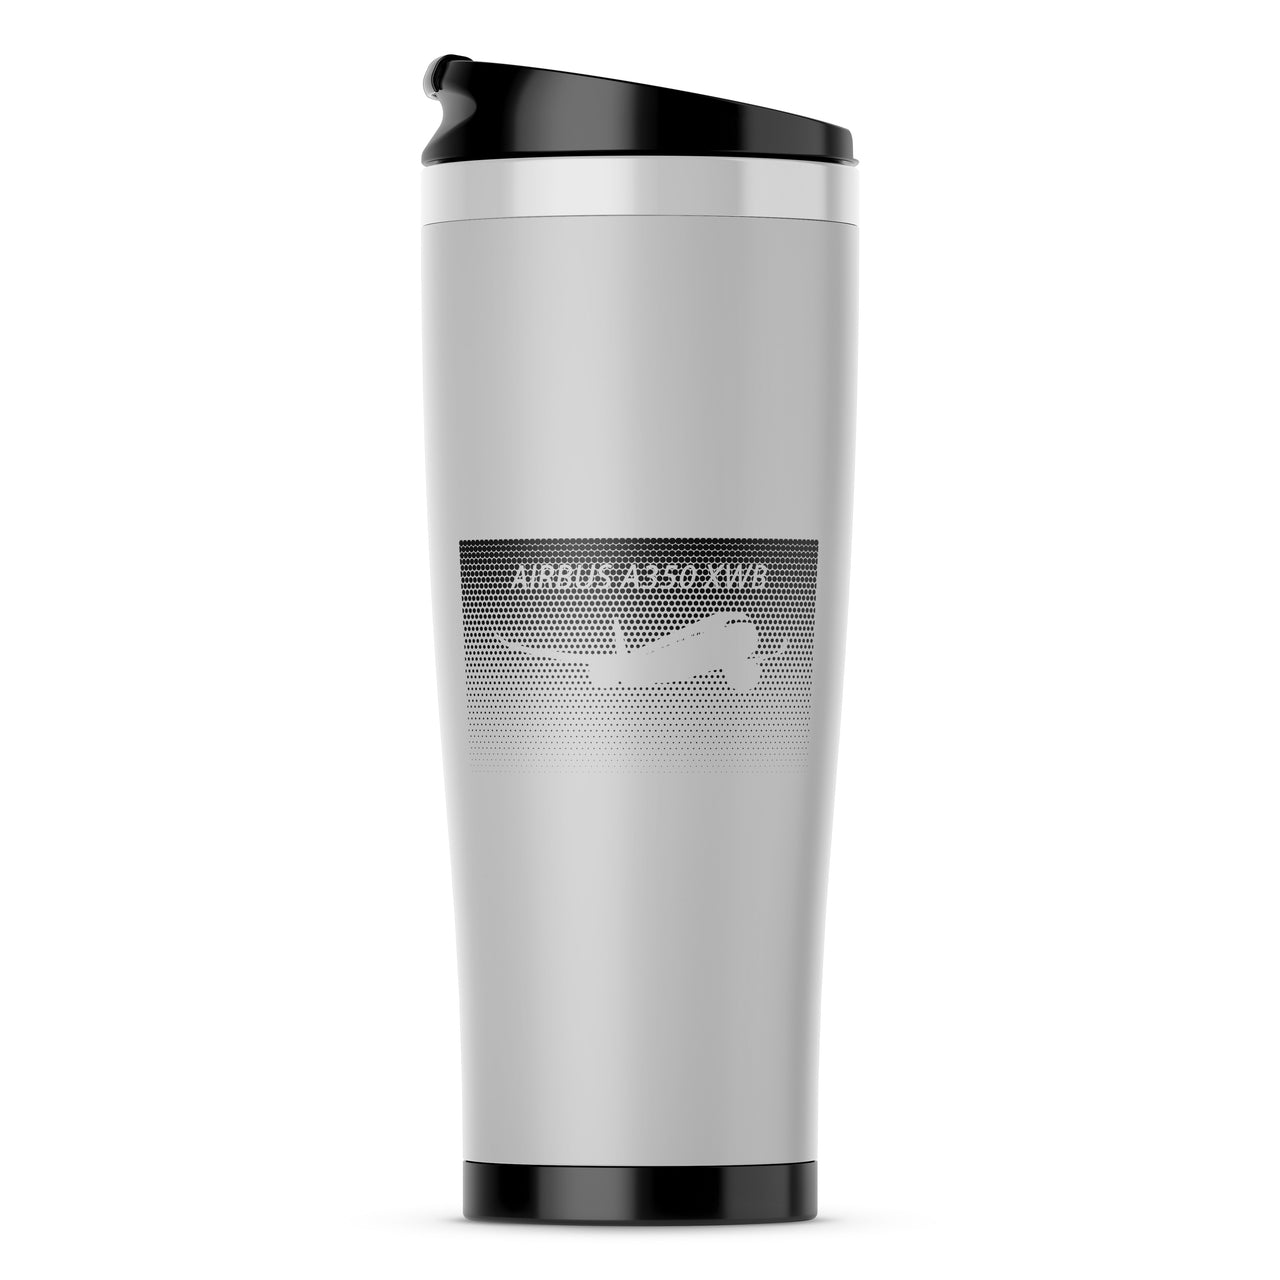 Airbus A350XWB & Dots Designed Stainless Steel Travel Mugs